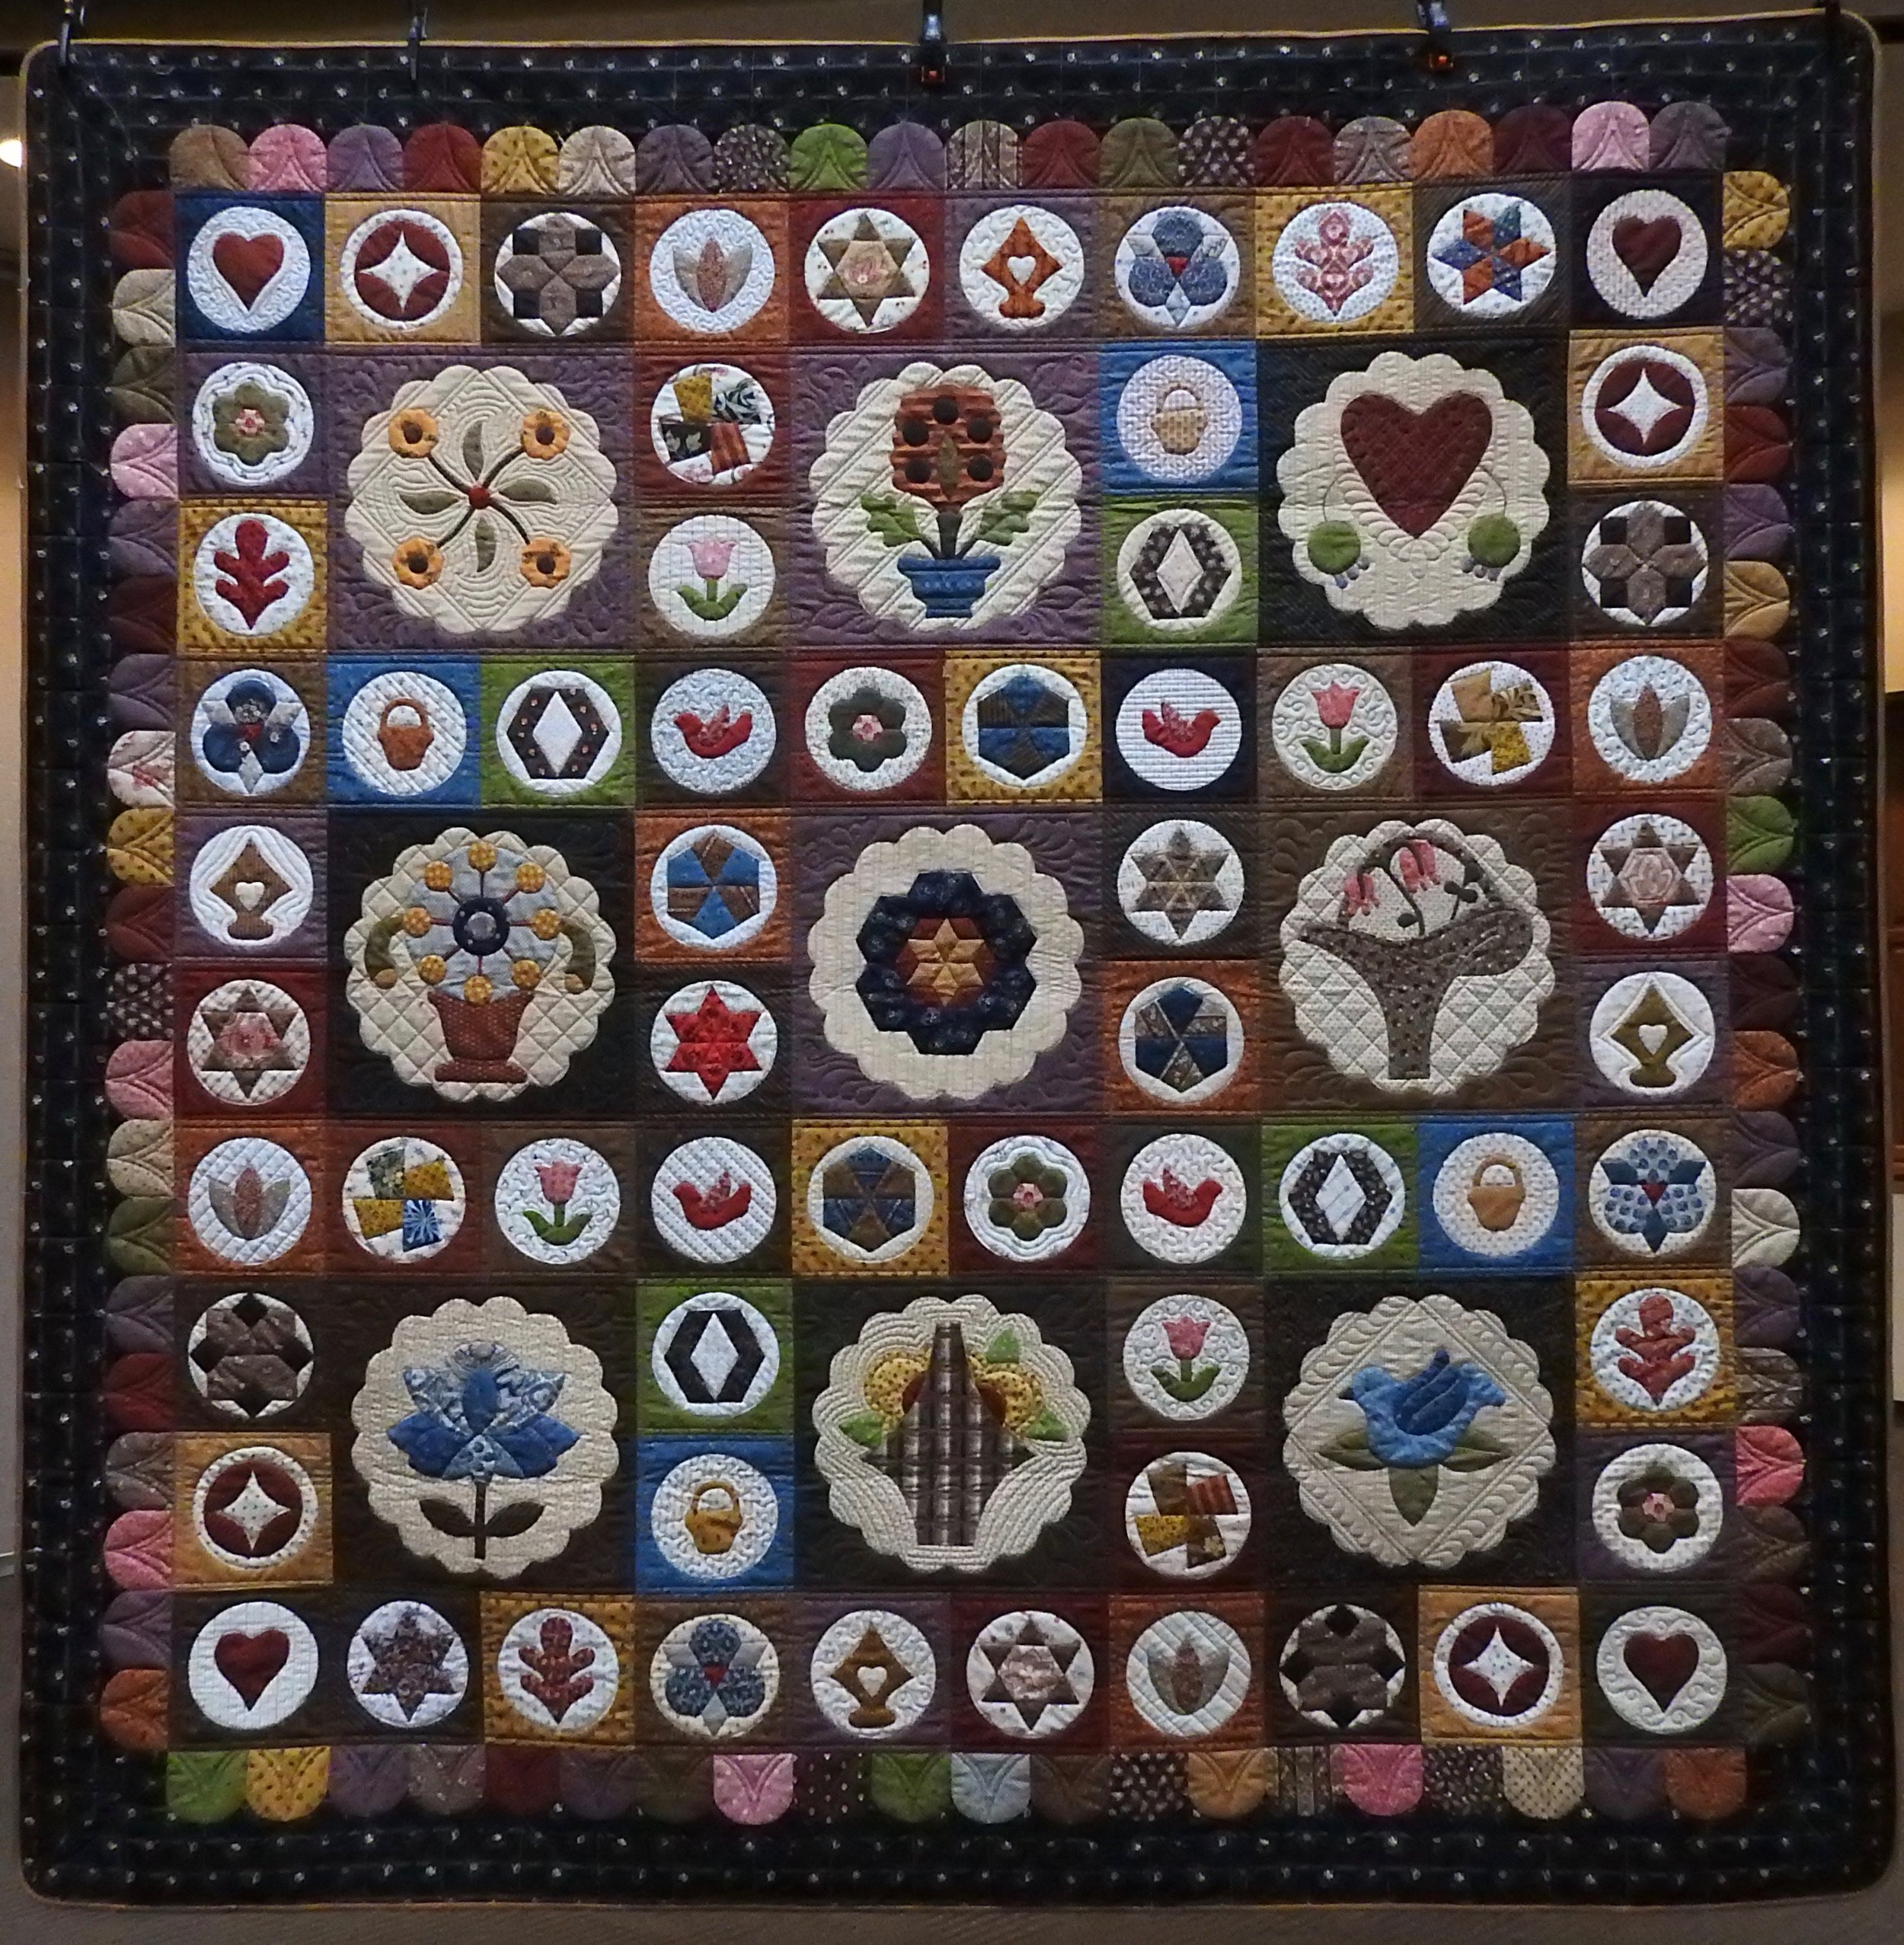 Antique Sampler Quilt, Pieced &amp; Appliquéd of New Fabrics by Edith Shanholt, pattern adapted from Antique Quilt by Sue Daley, Custom Machine Quilted, donated by Edith Shanholt, 72 x 72”